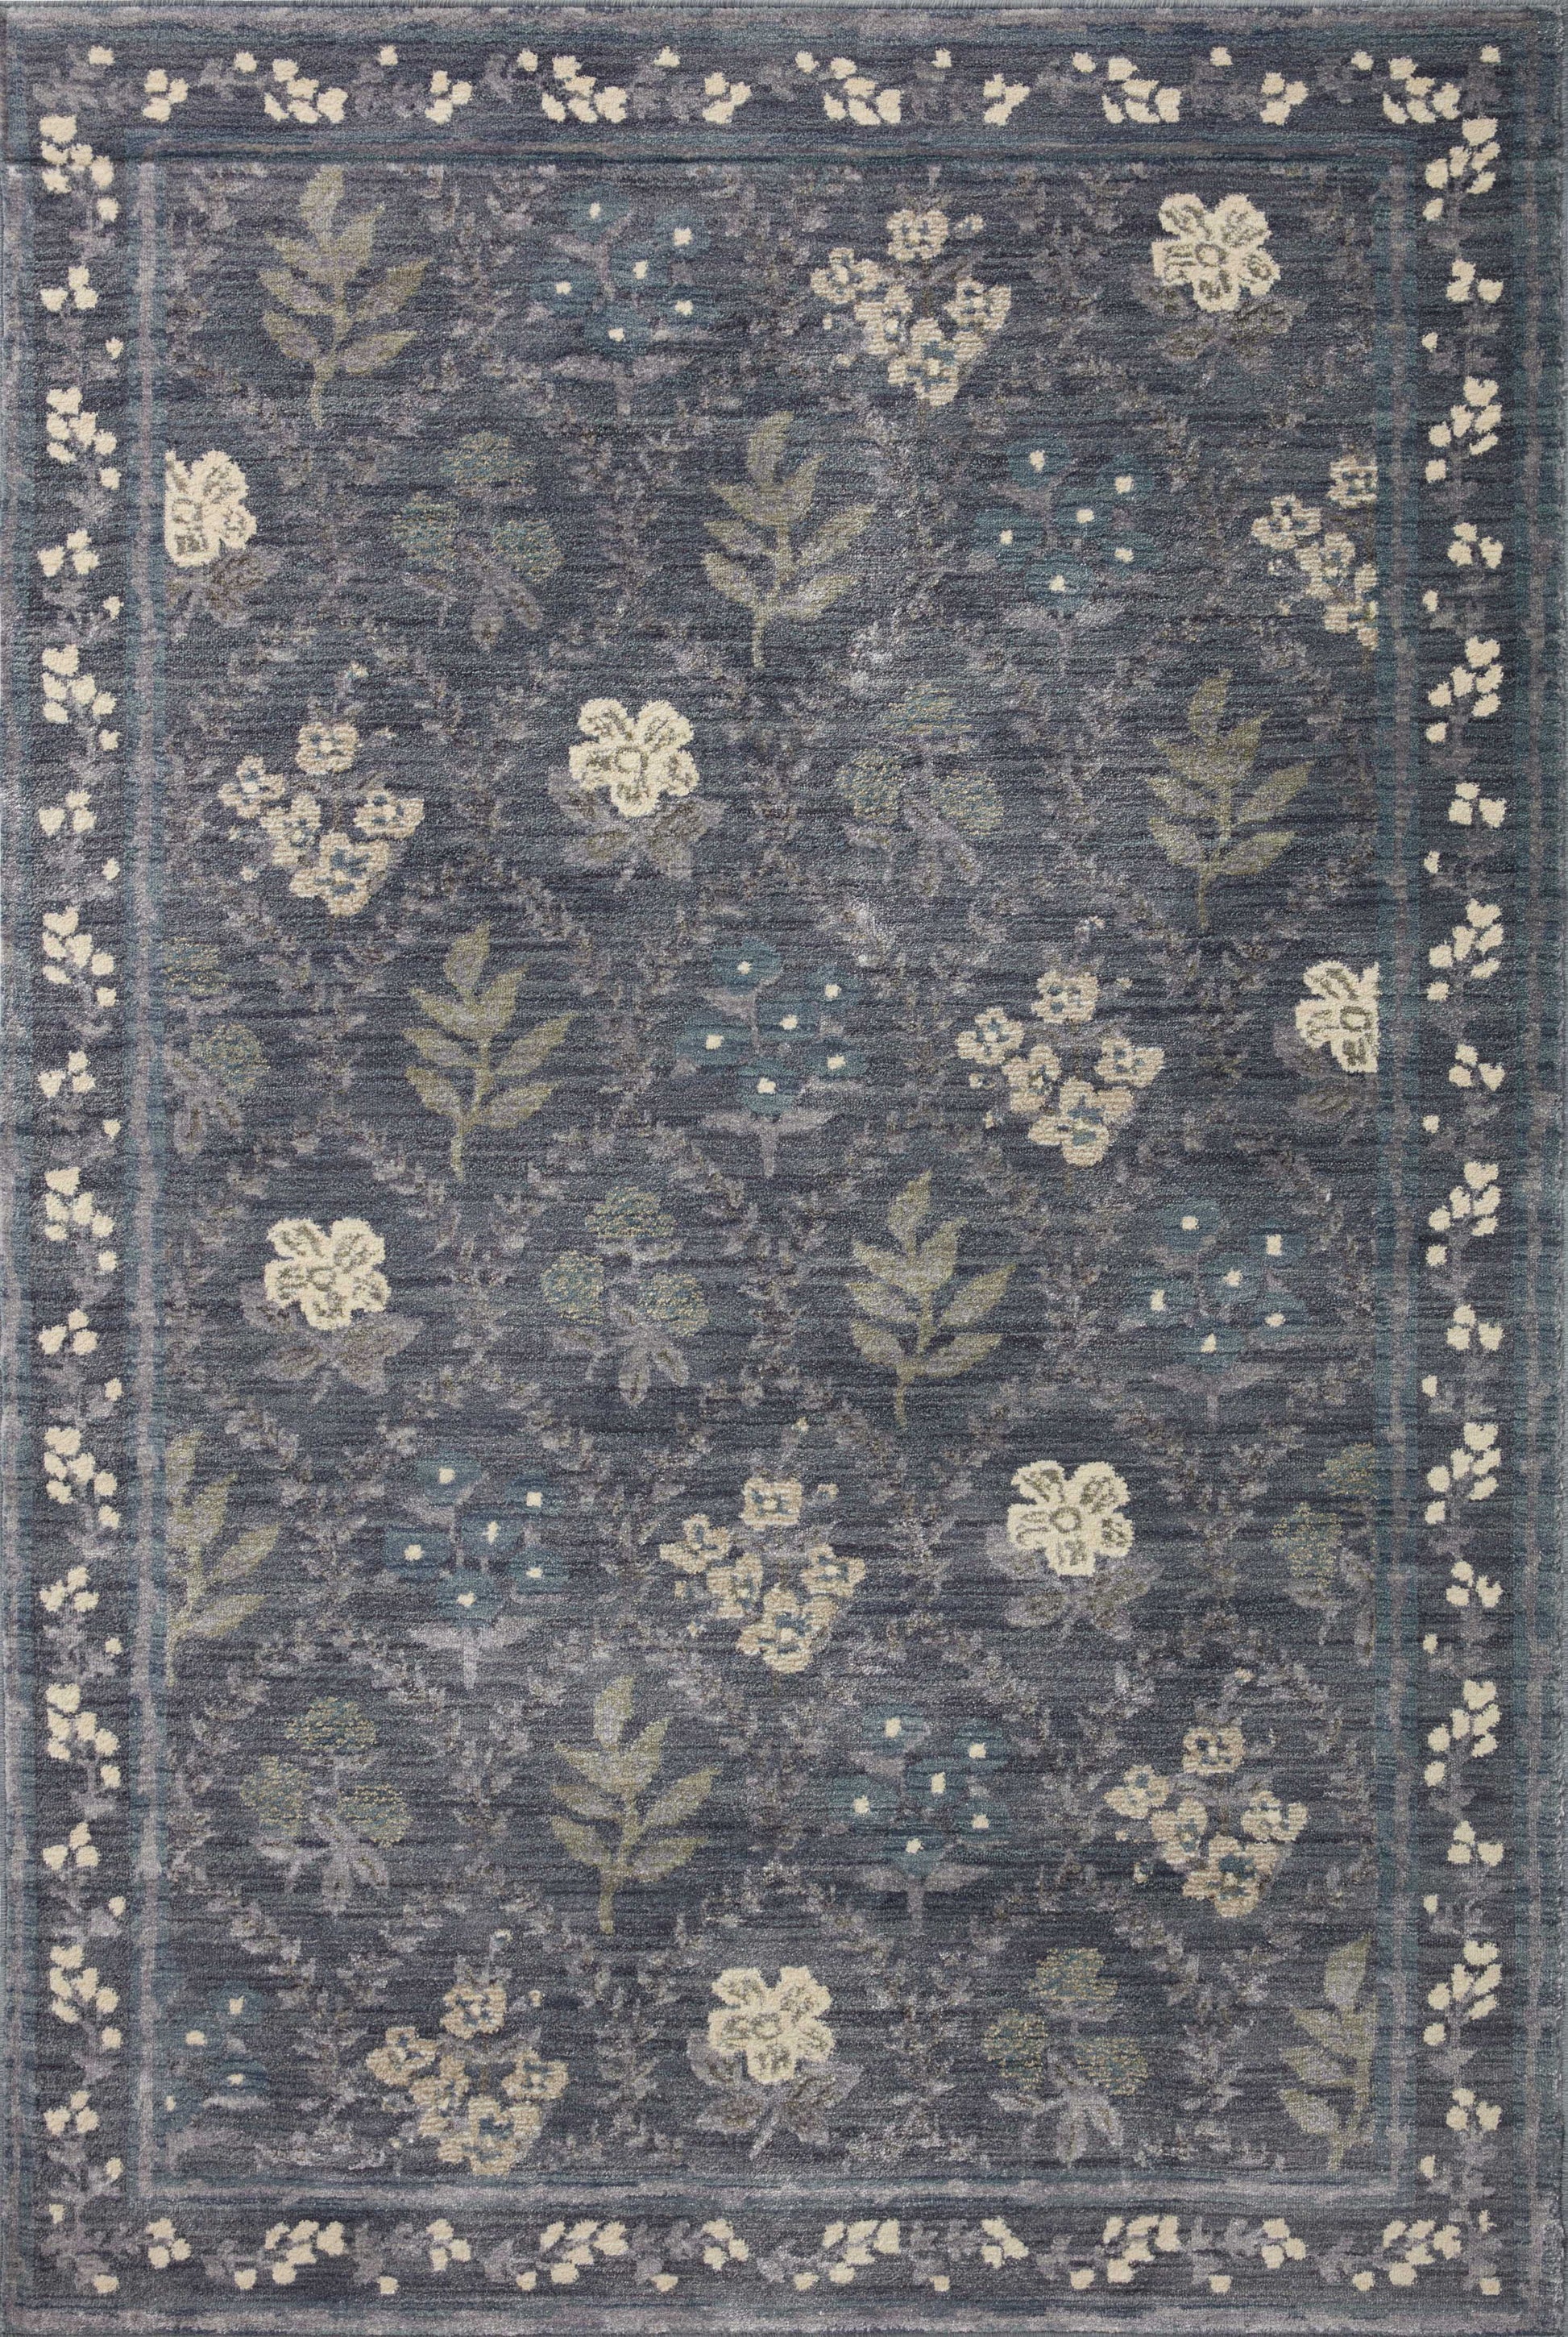 A picture of Loloi's Fiore rug, in style FIO-04, color Navy